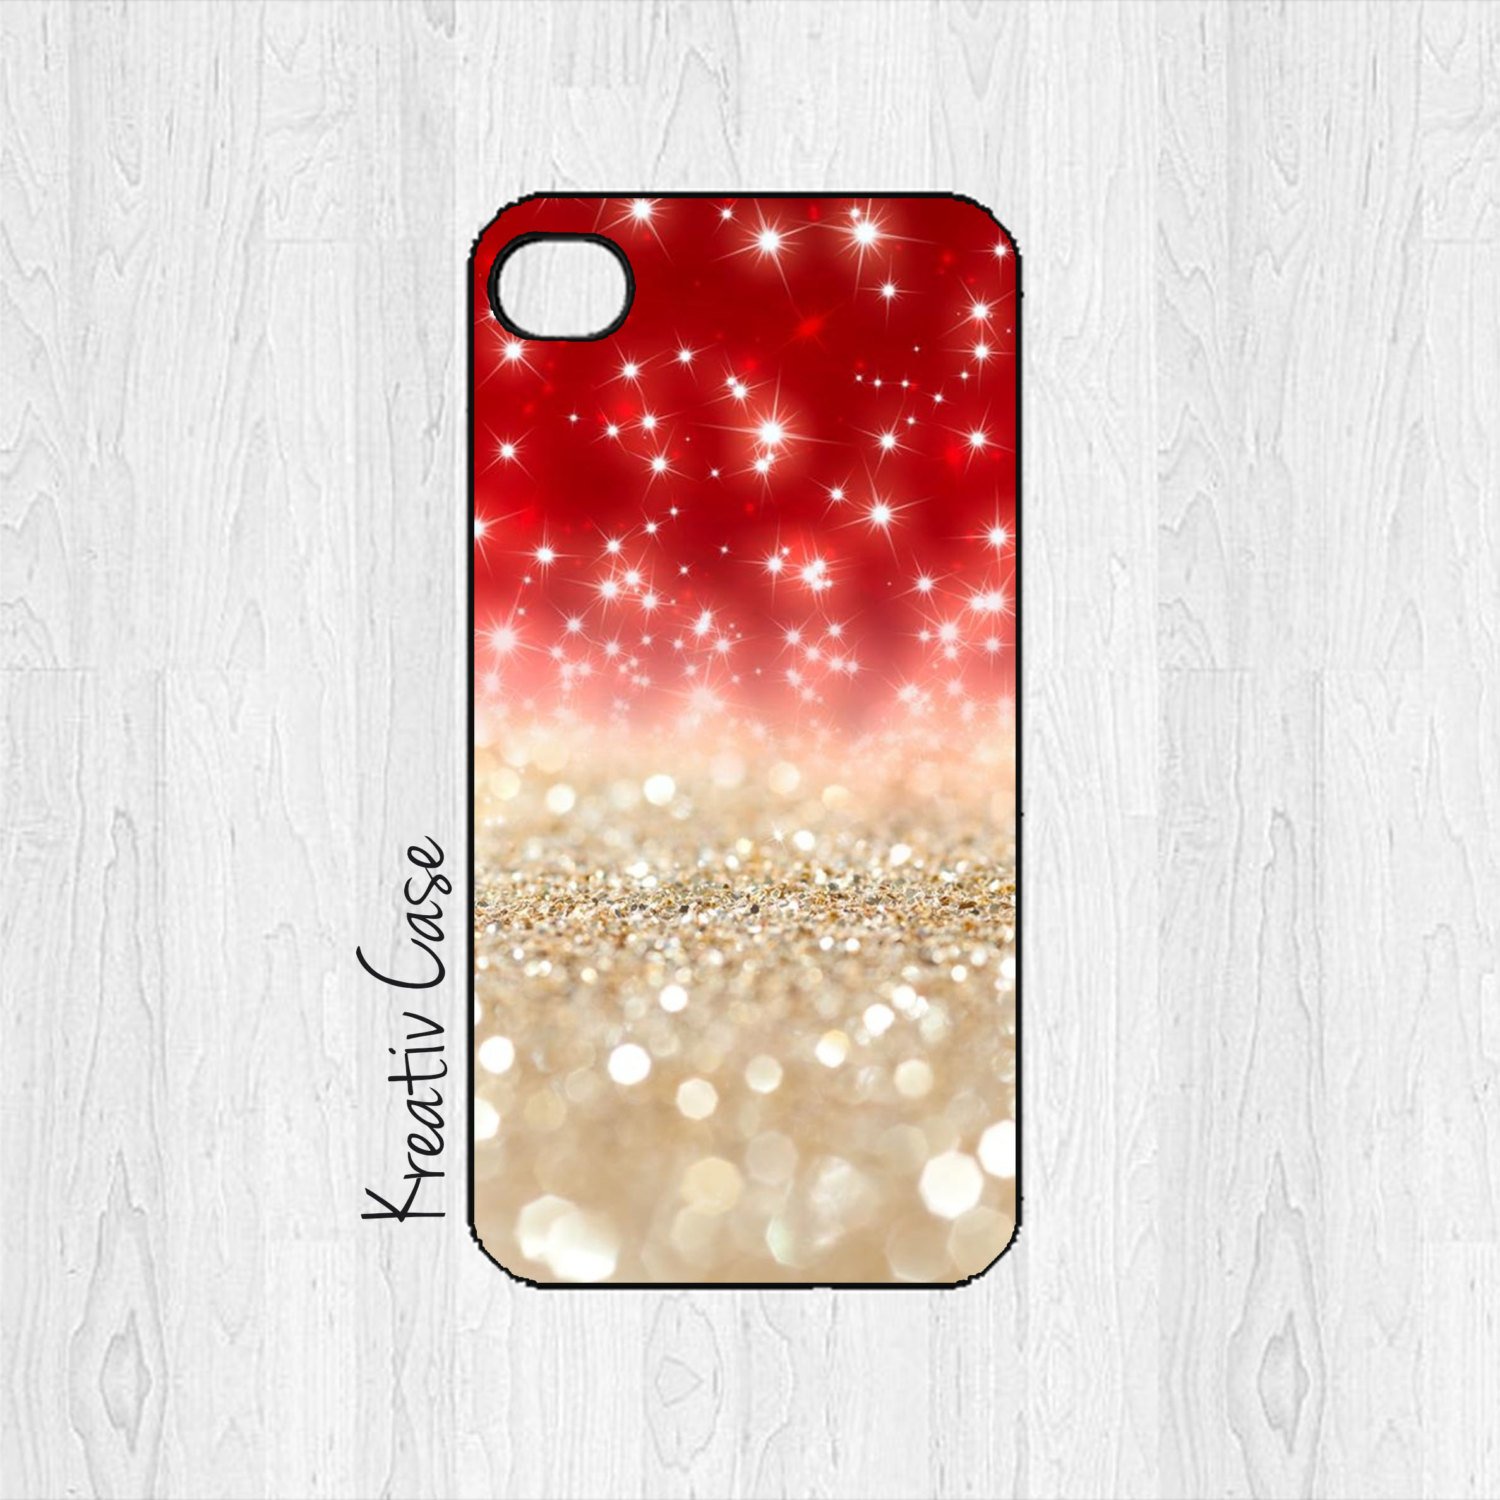 27 Cute Christmas iPhone Cases 3